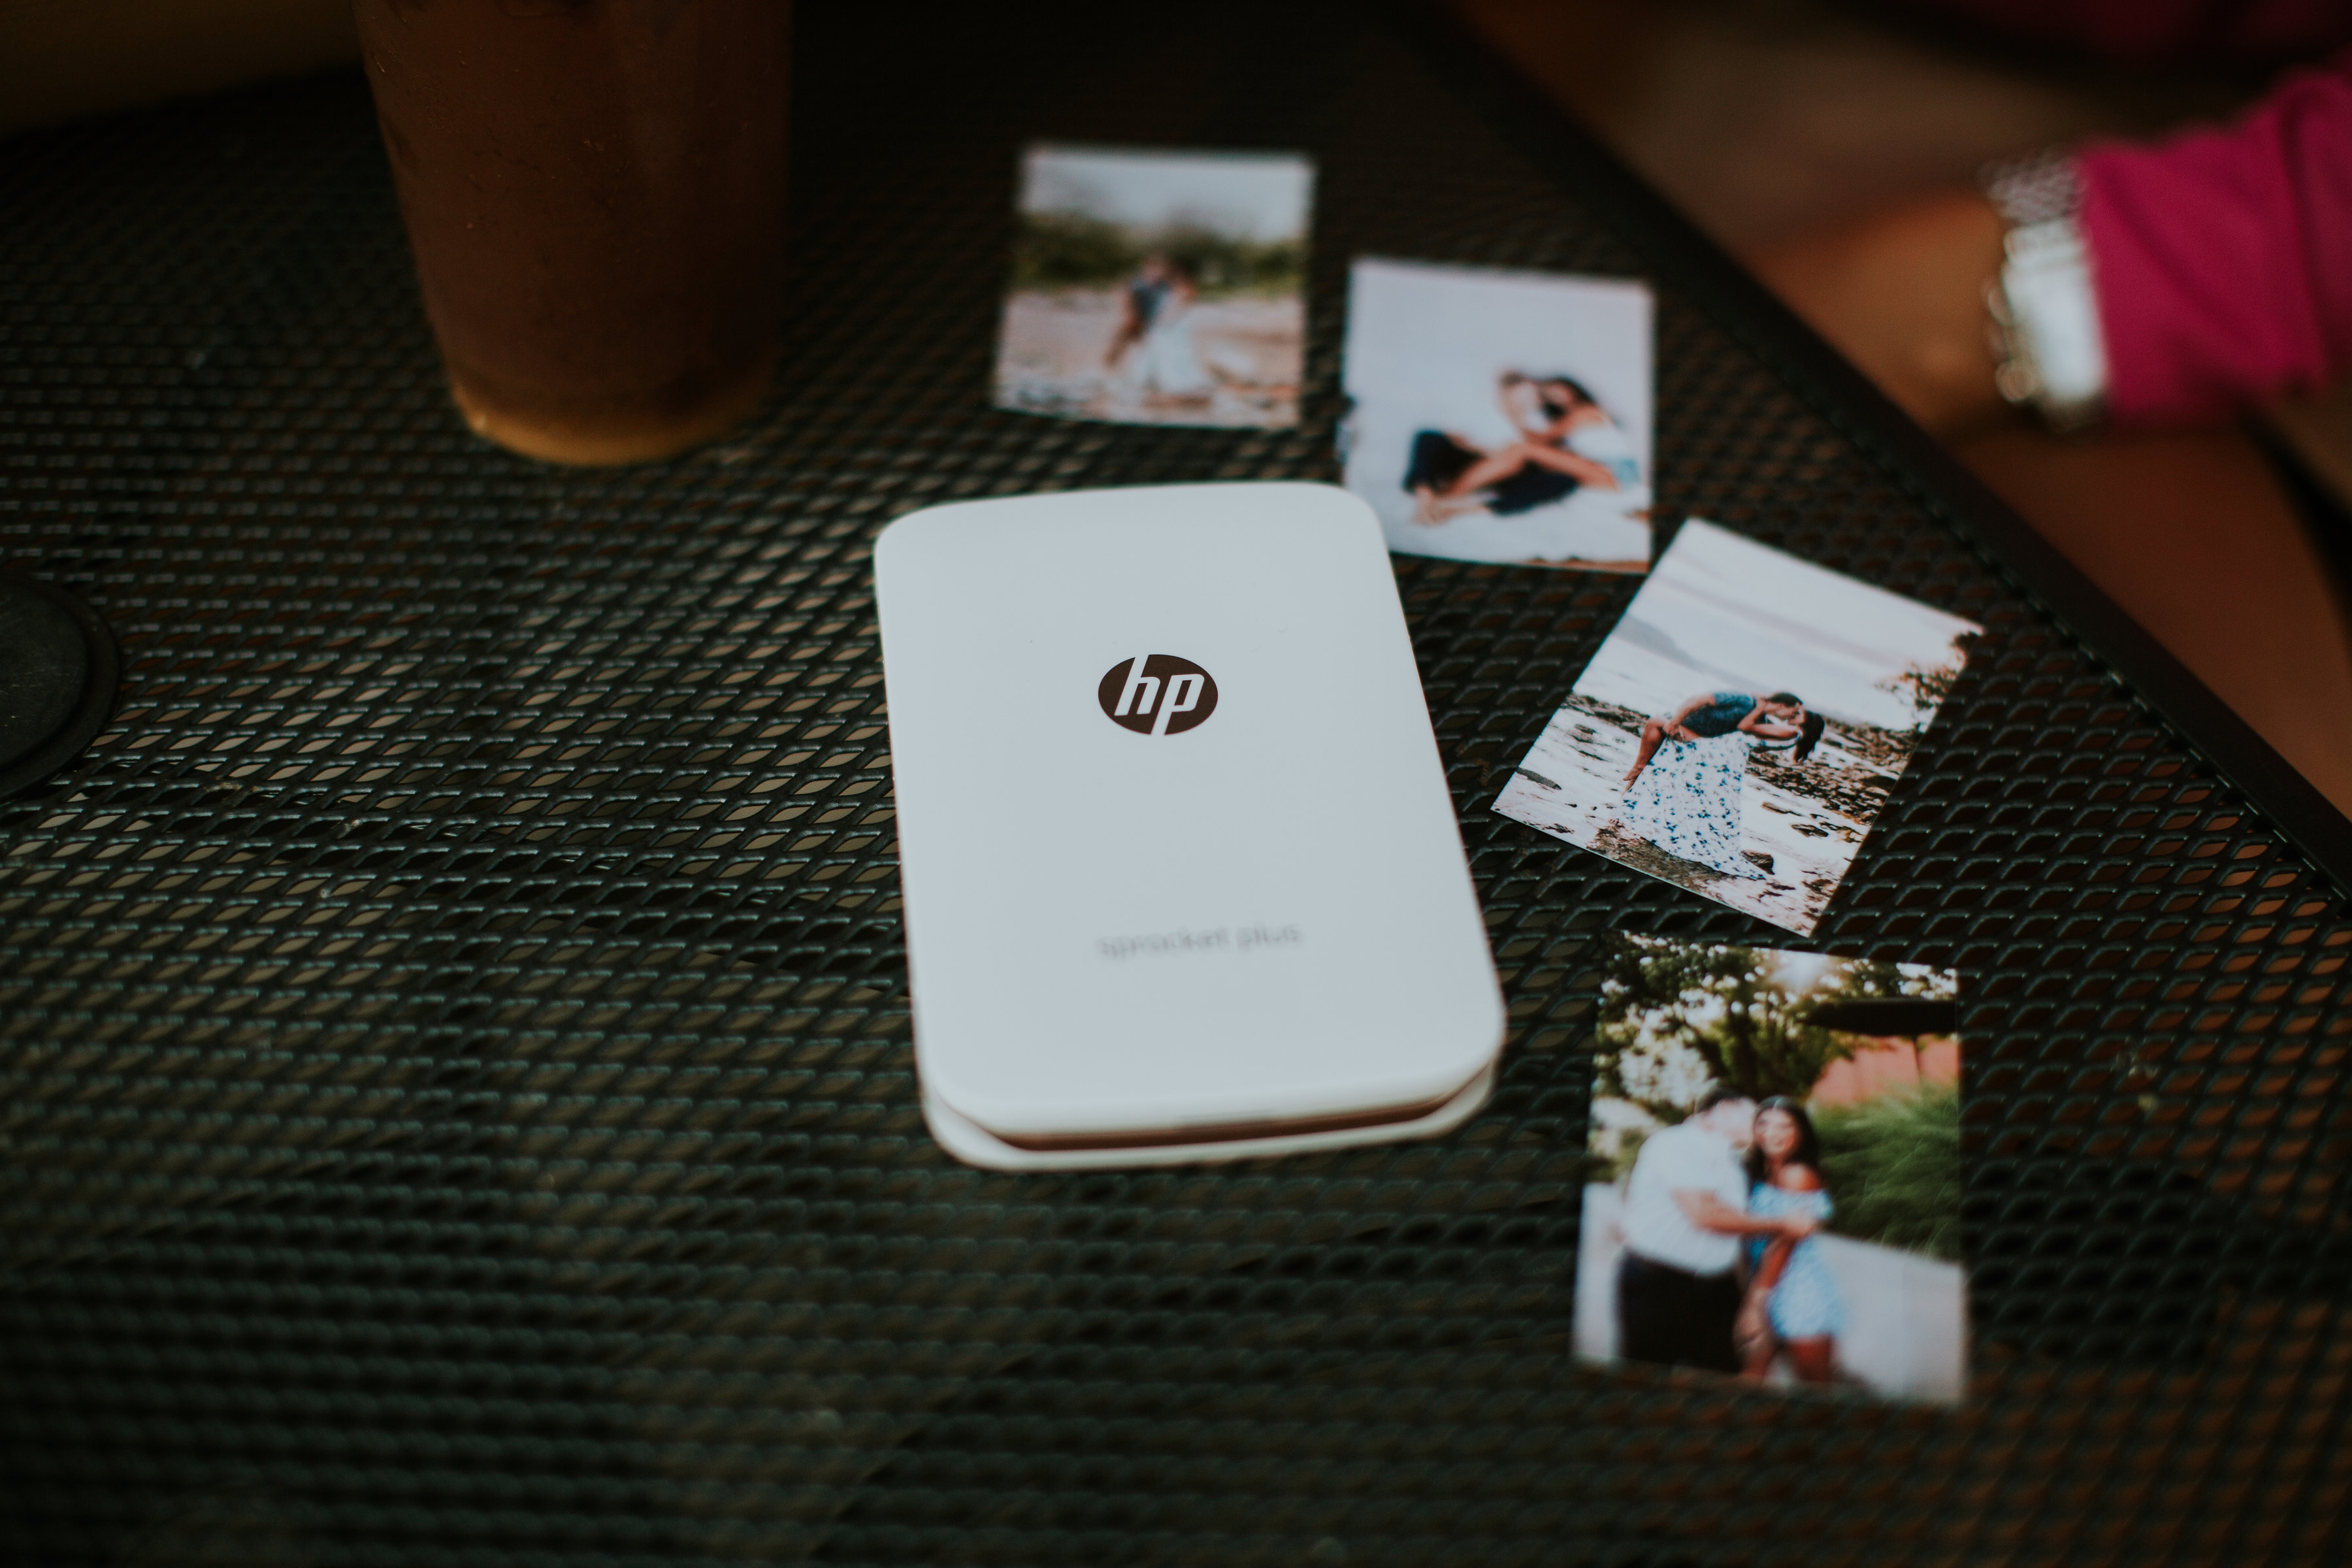 HP Sprocket Plus Photo Printer, hp sprocket printer, hp printer, portable photo printer, printer gadget, gifts for him, fun gift ideas // grace wainwright grace white a southern drawl